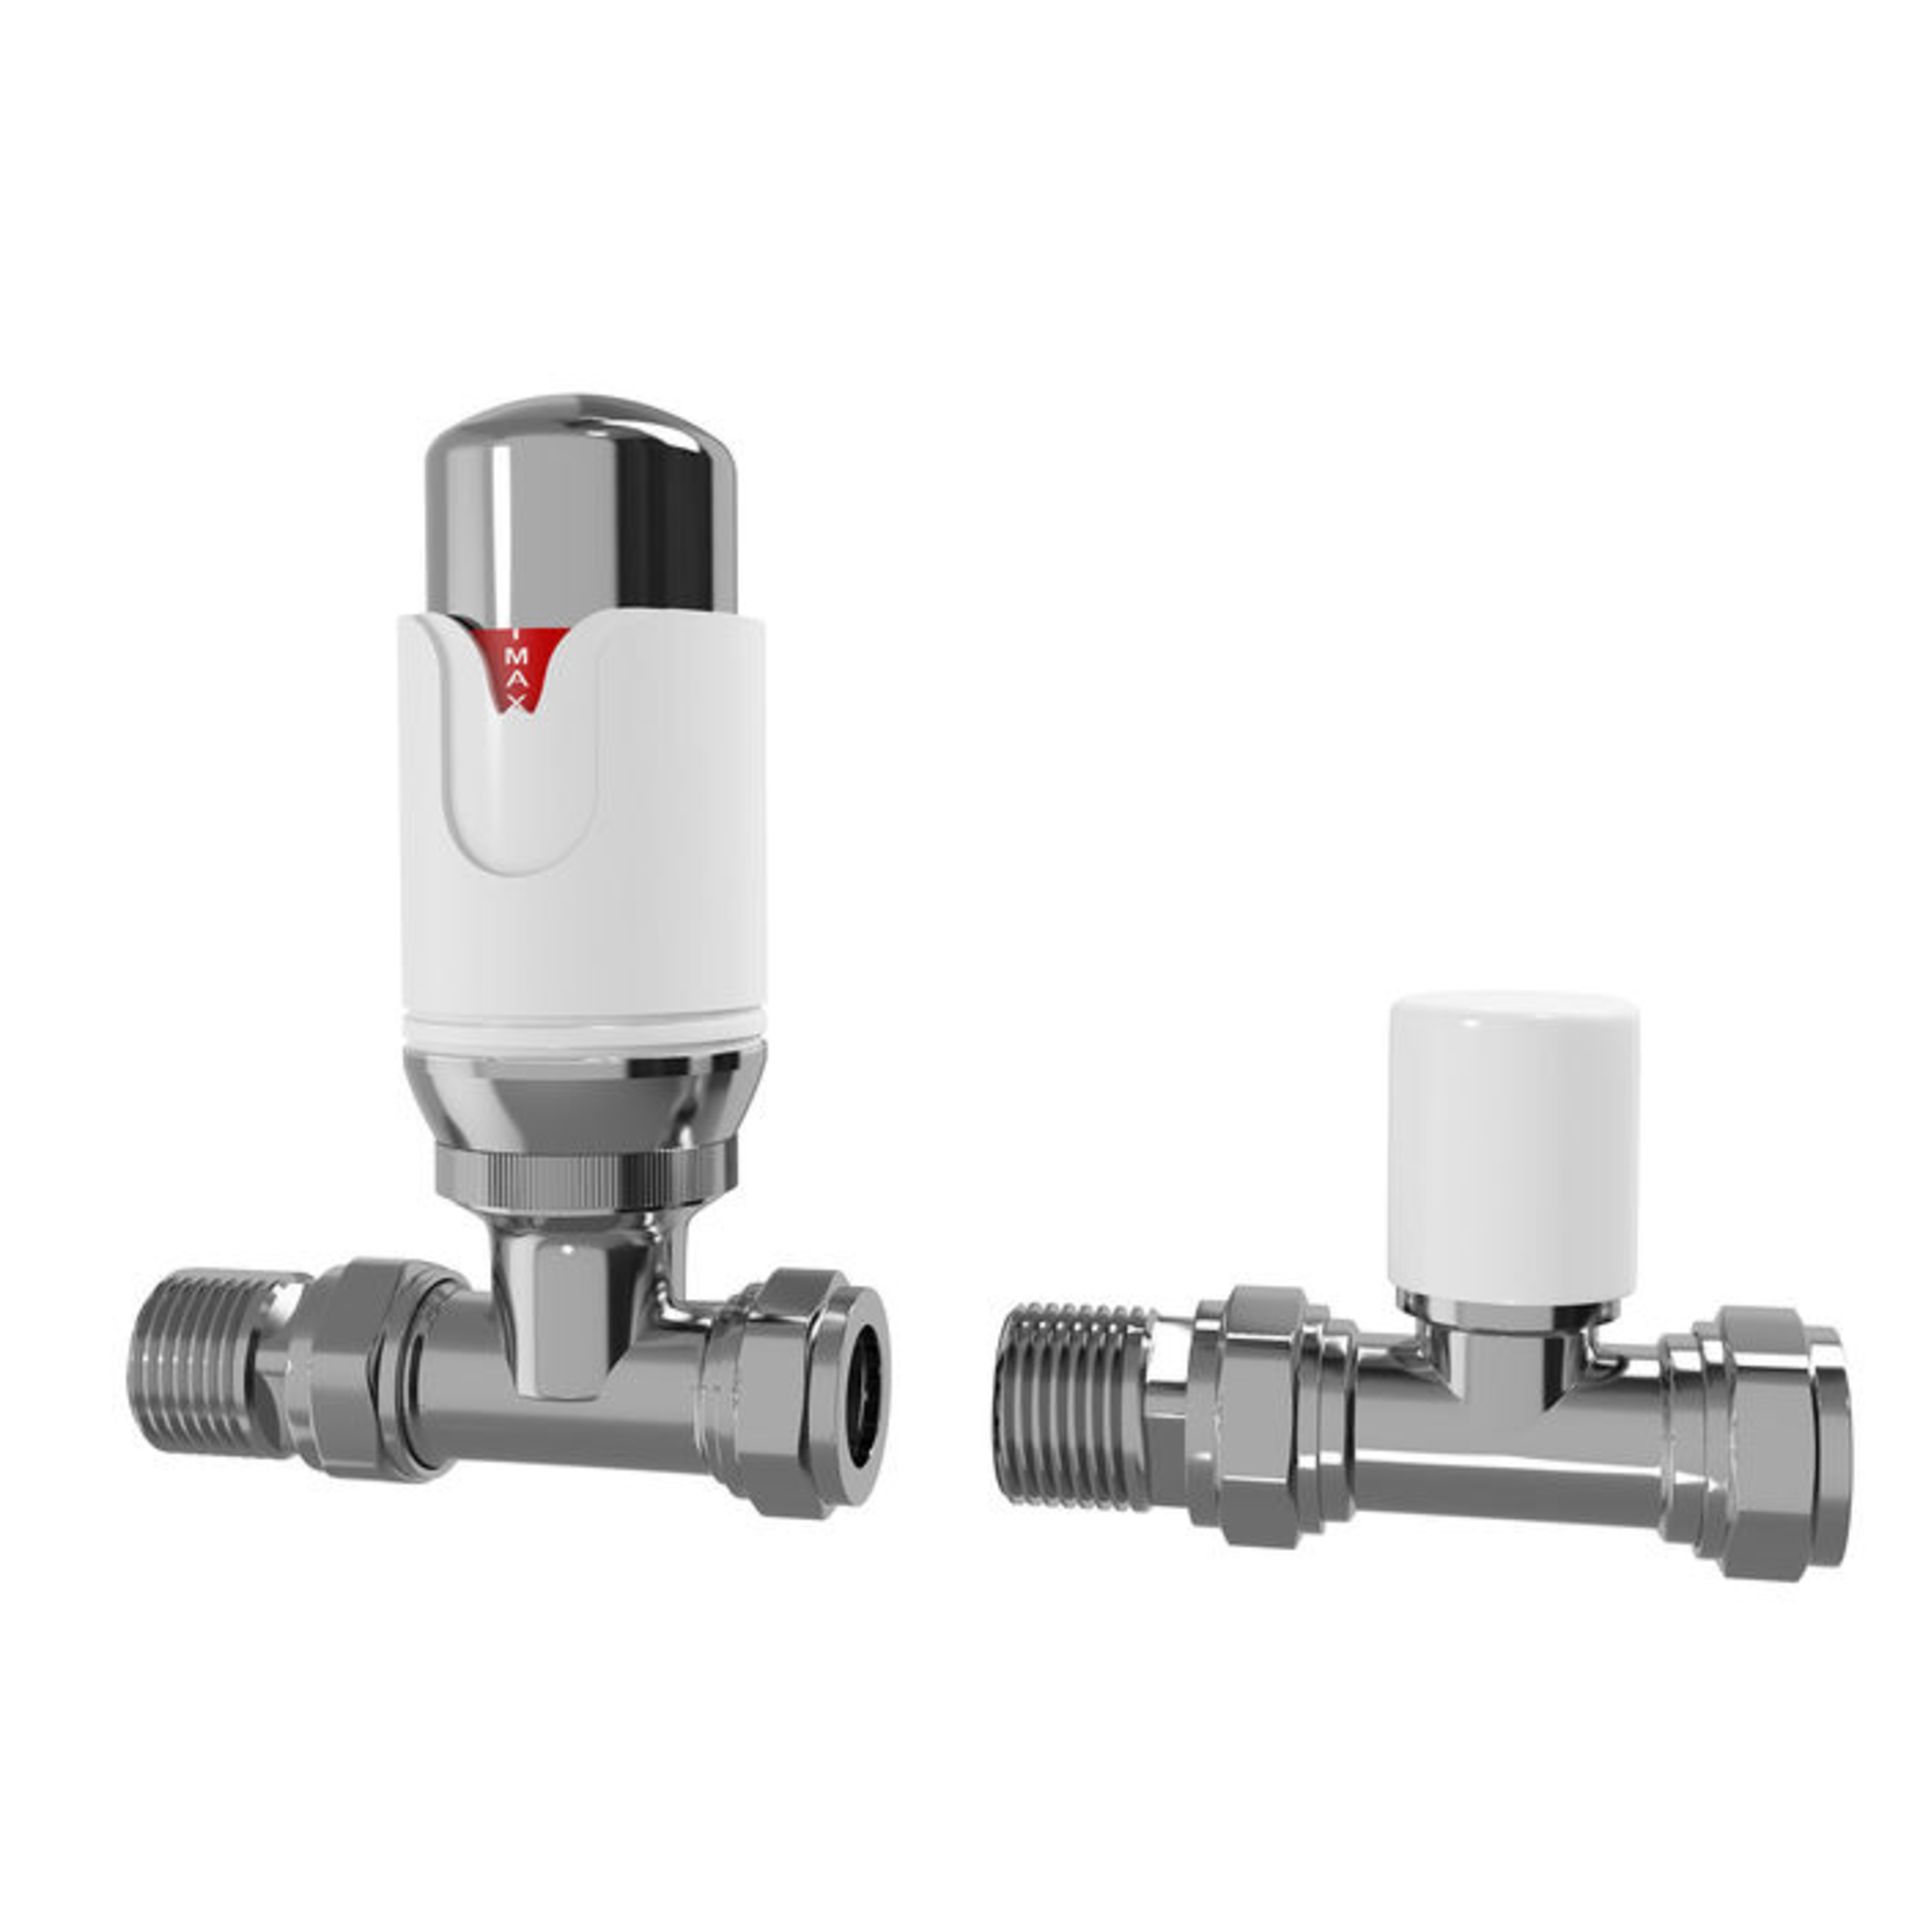 (G146) 15mm Standard Connection Thermostatic Angled Gloss White & Chrome Radiator Valves Solid brass